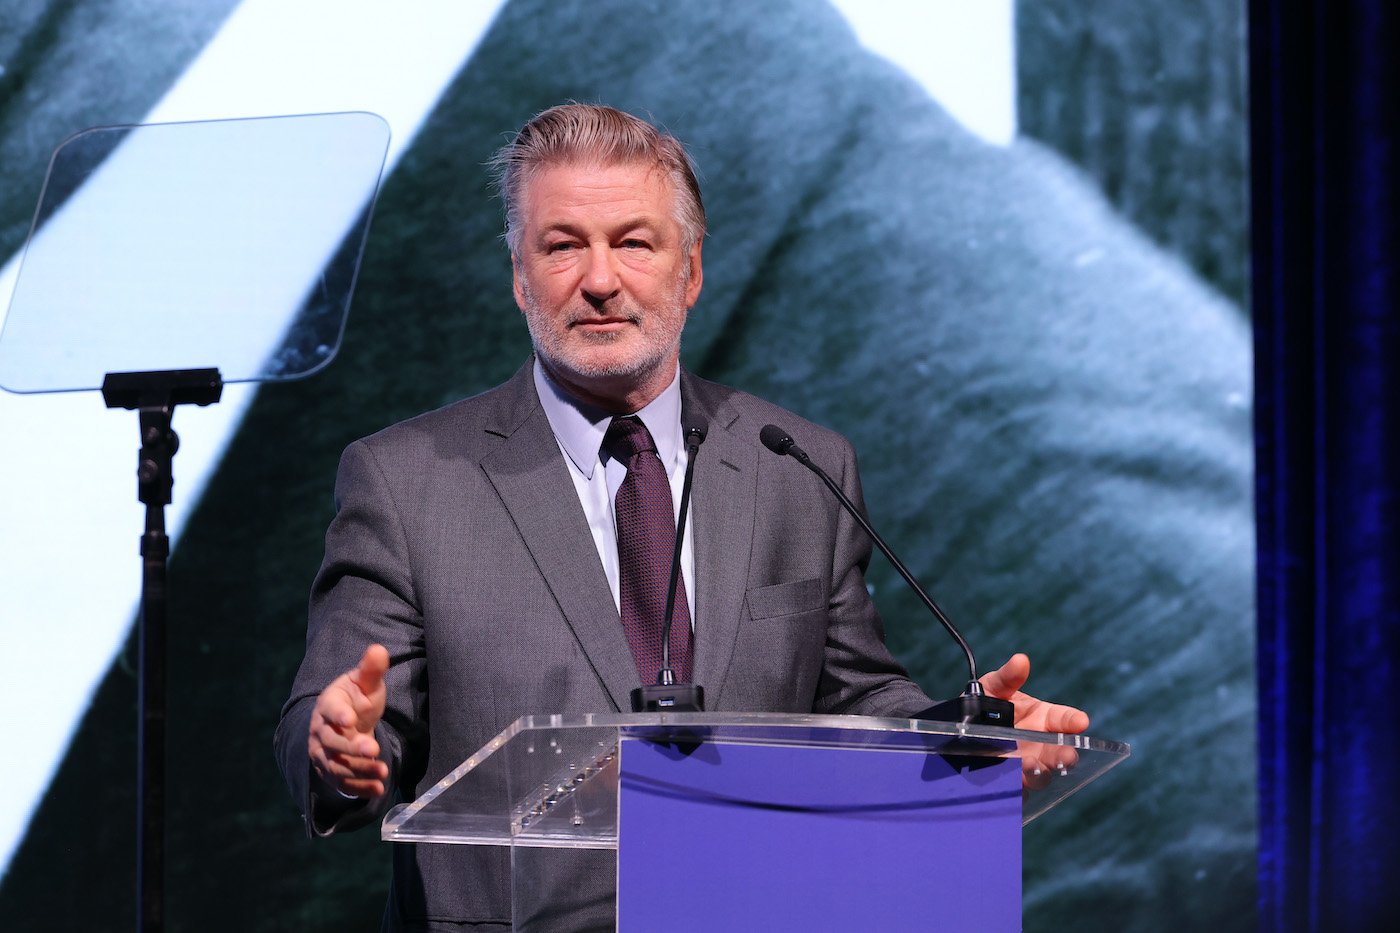 Alec Baldwin speaks at a charity event and stands at a podium 